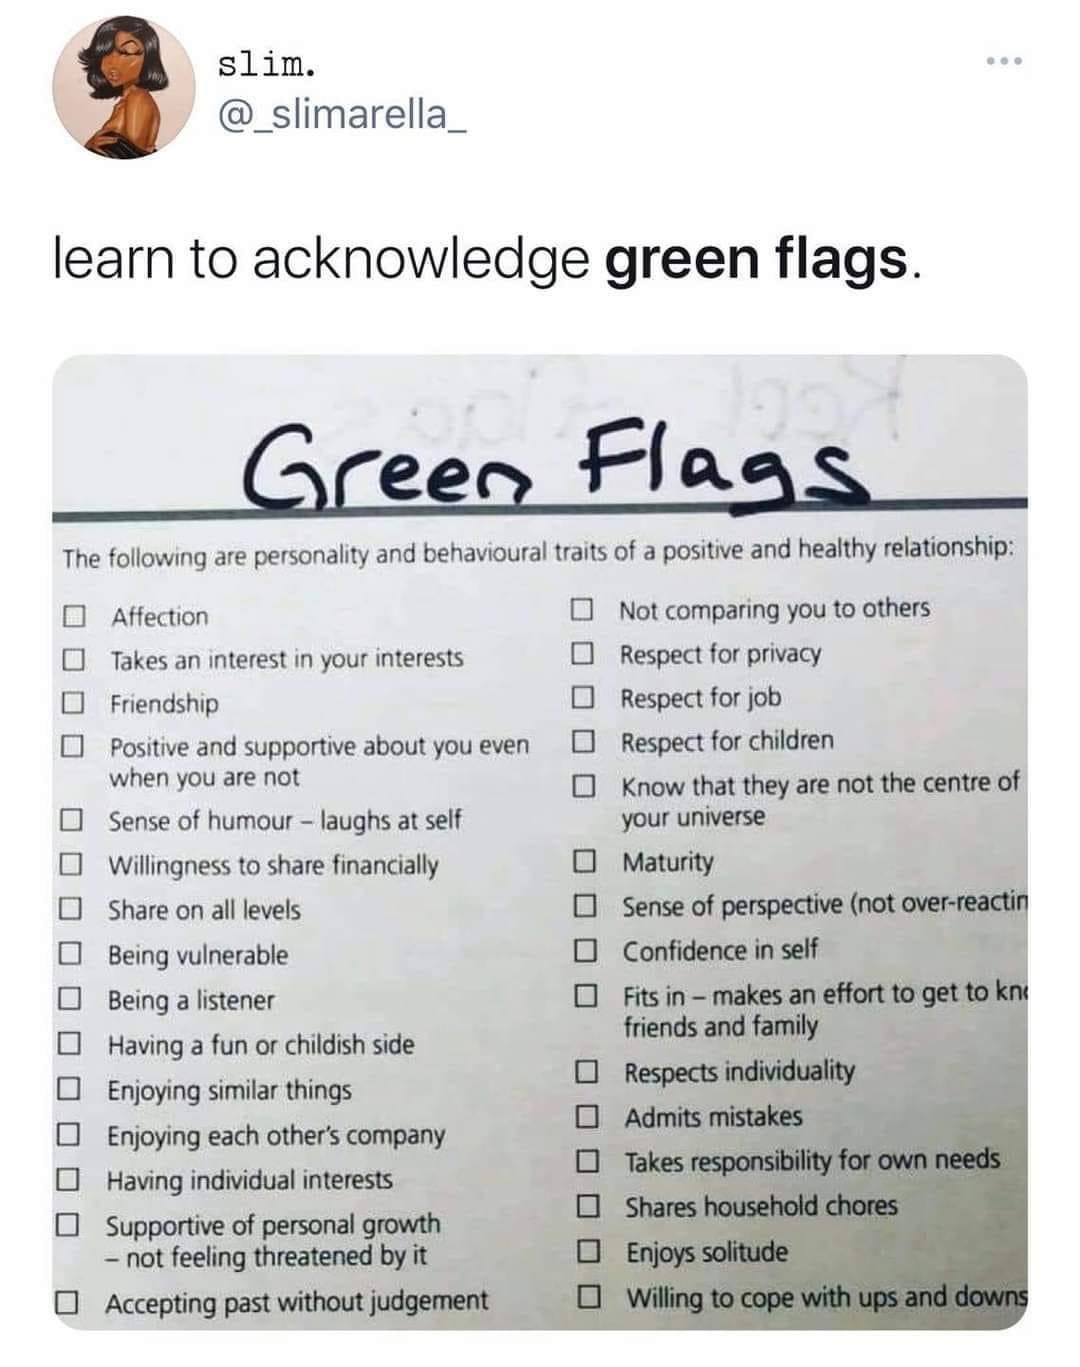 Guide for green flags